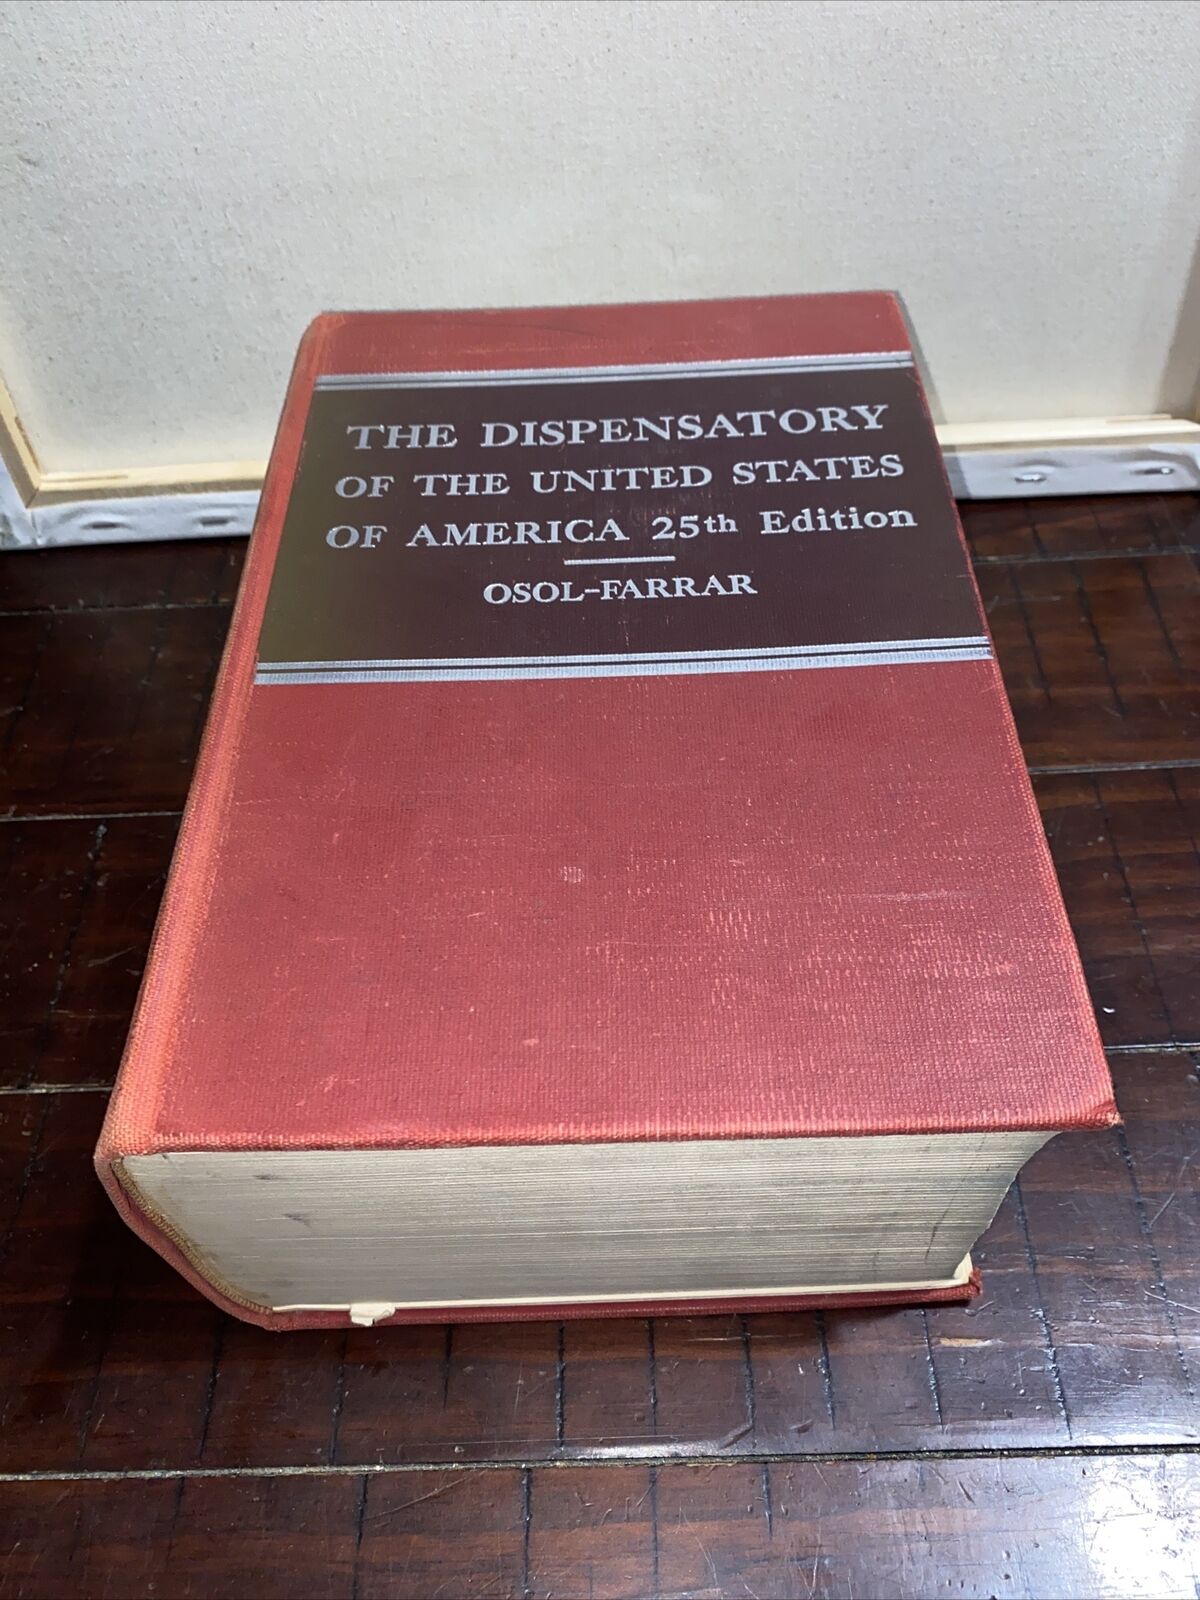 DISPENSATORY OF THE UNITED STATES OF AMERICA 25TH EDITION 1955 BOOK OSOL-FARRER